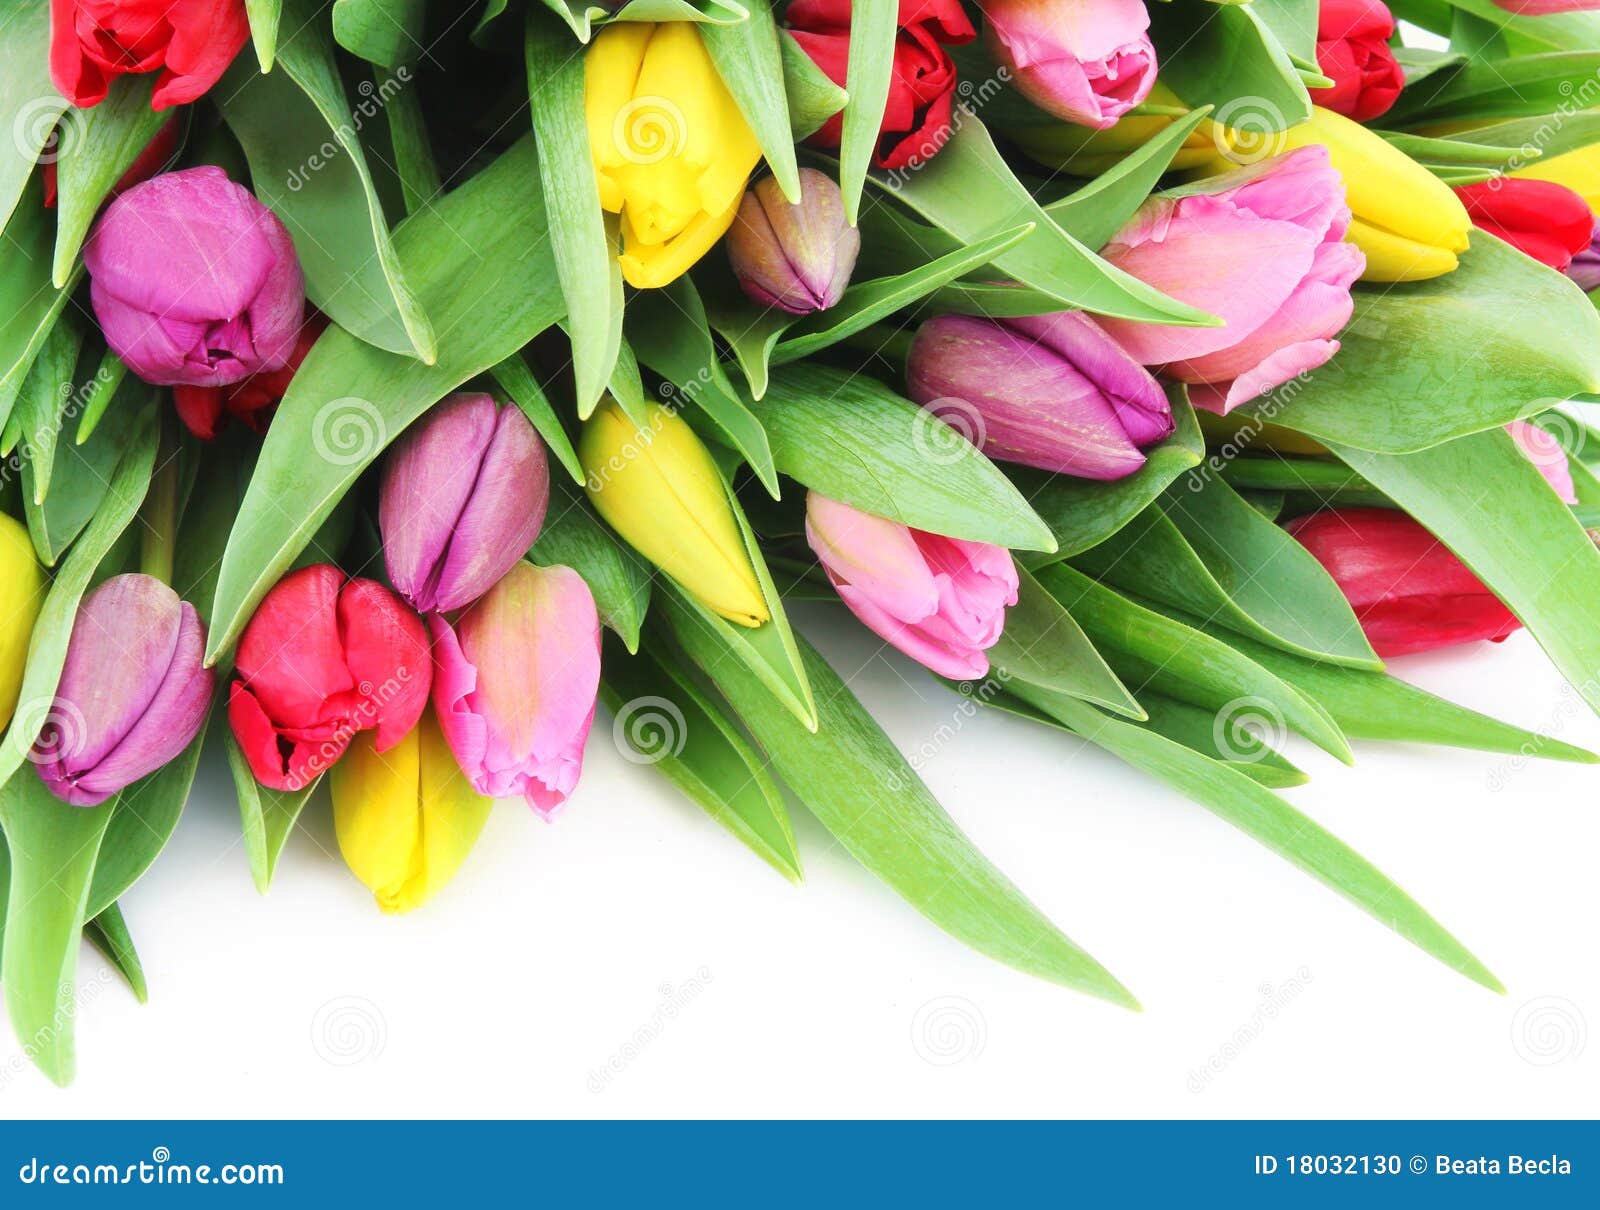 Spring tulip flowers stock photo. Image of gift, beauty - 18032130